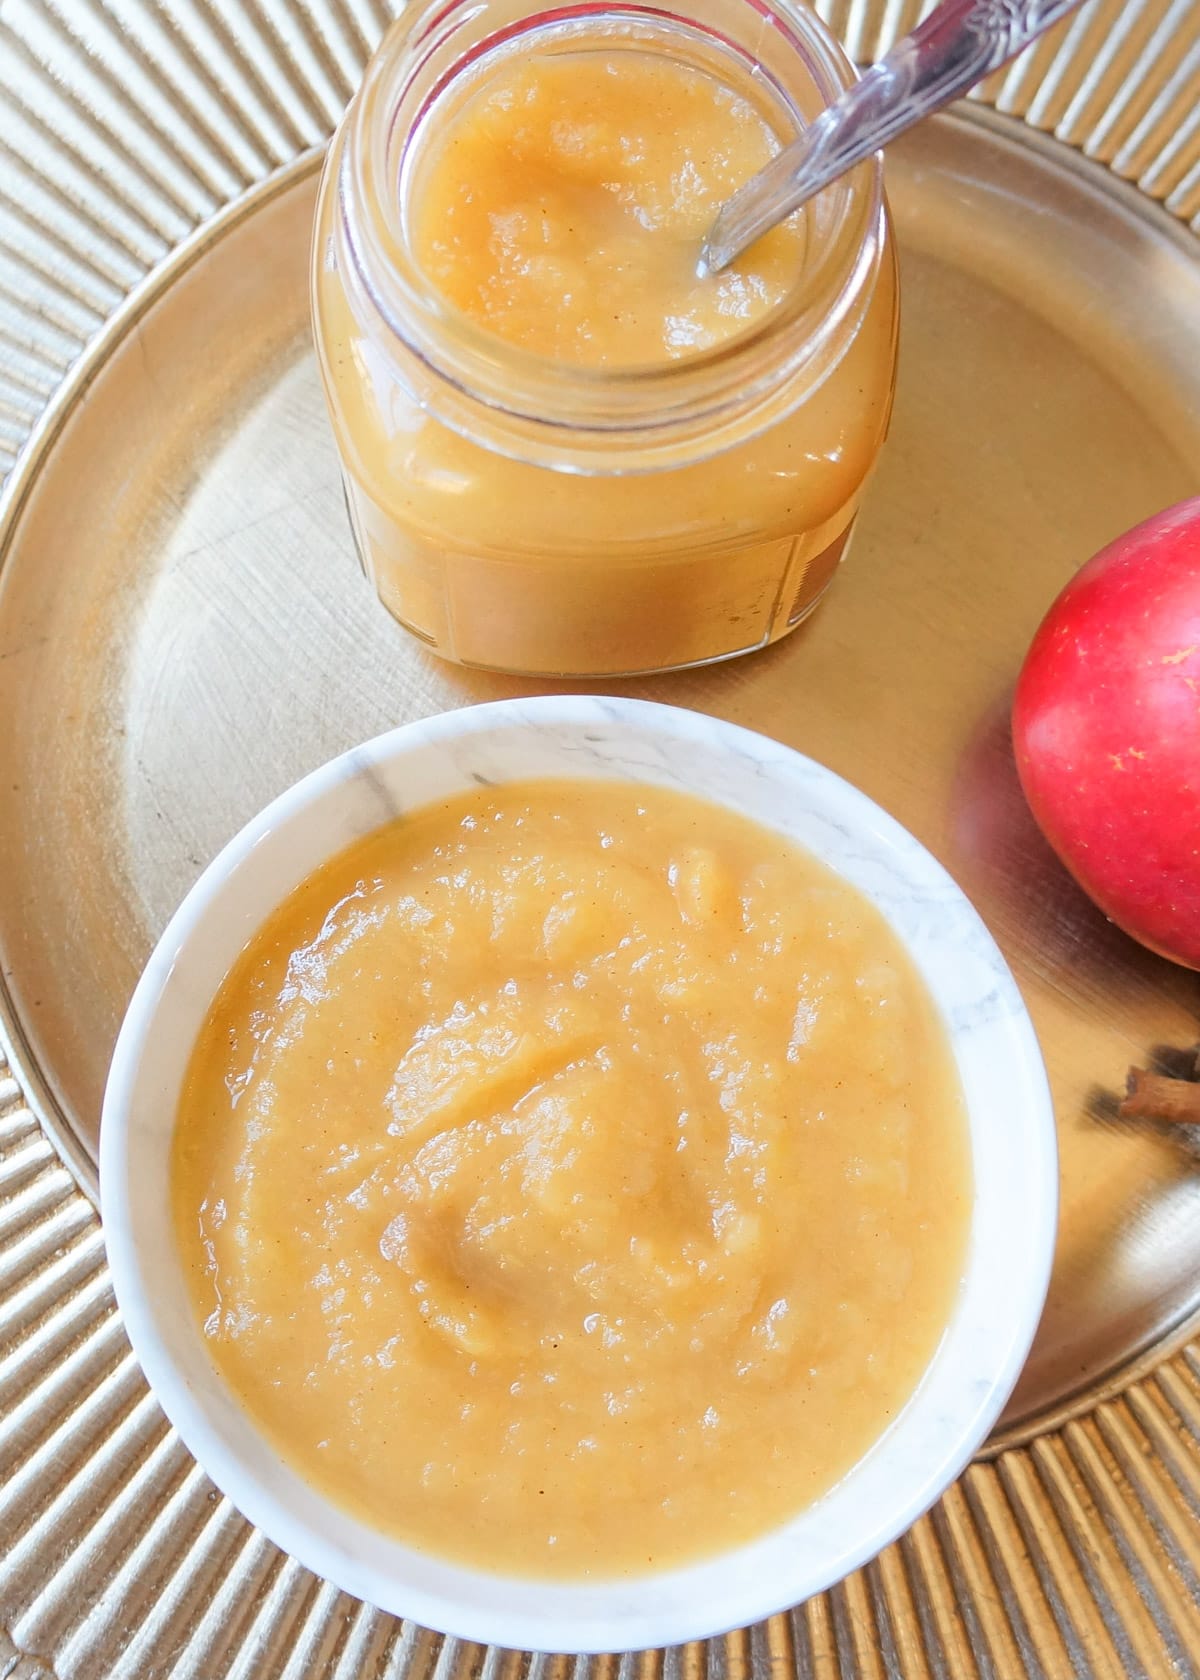 Applesauce in a white bowl and in a glass jar